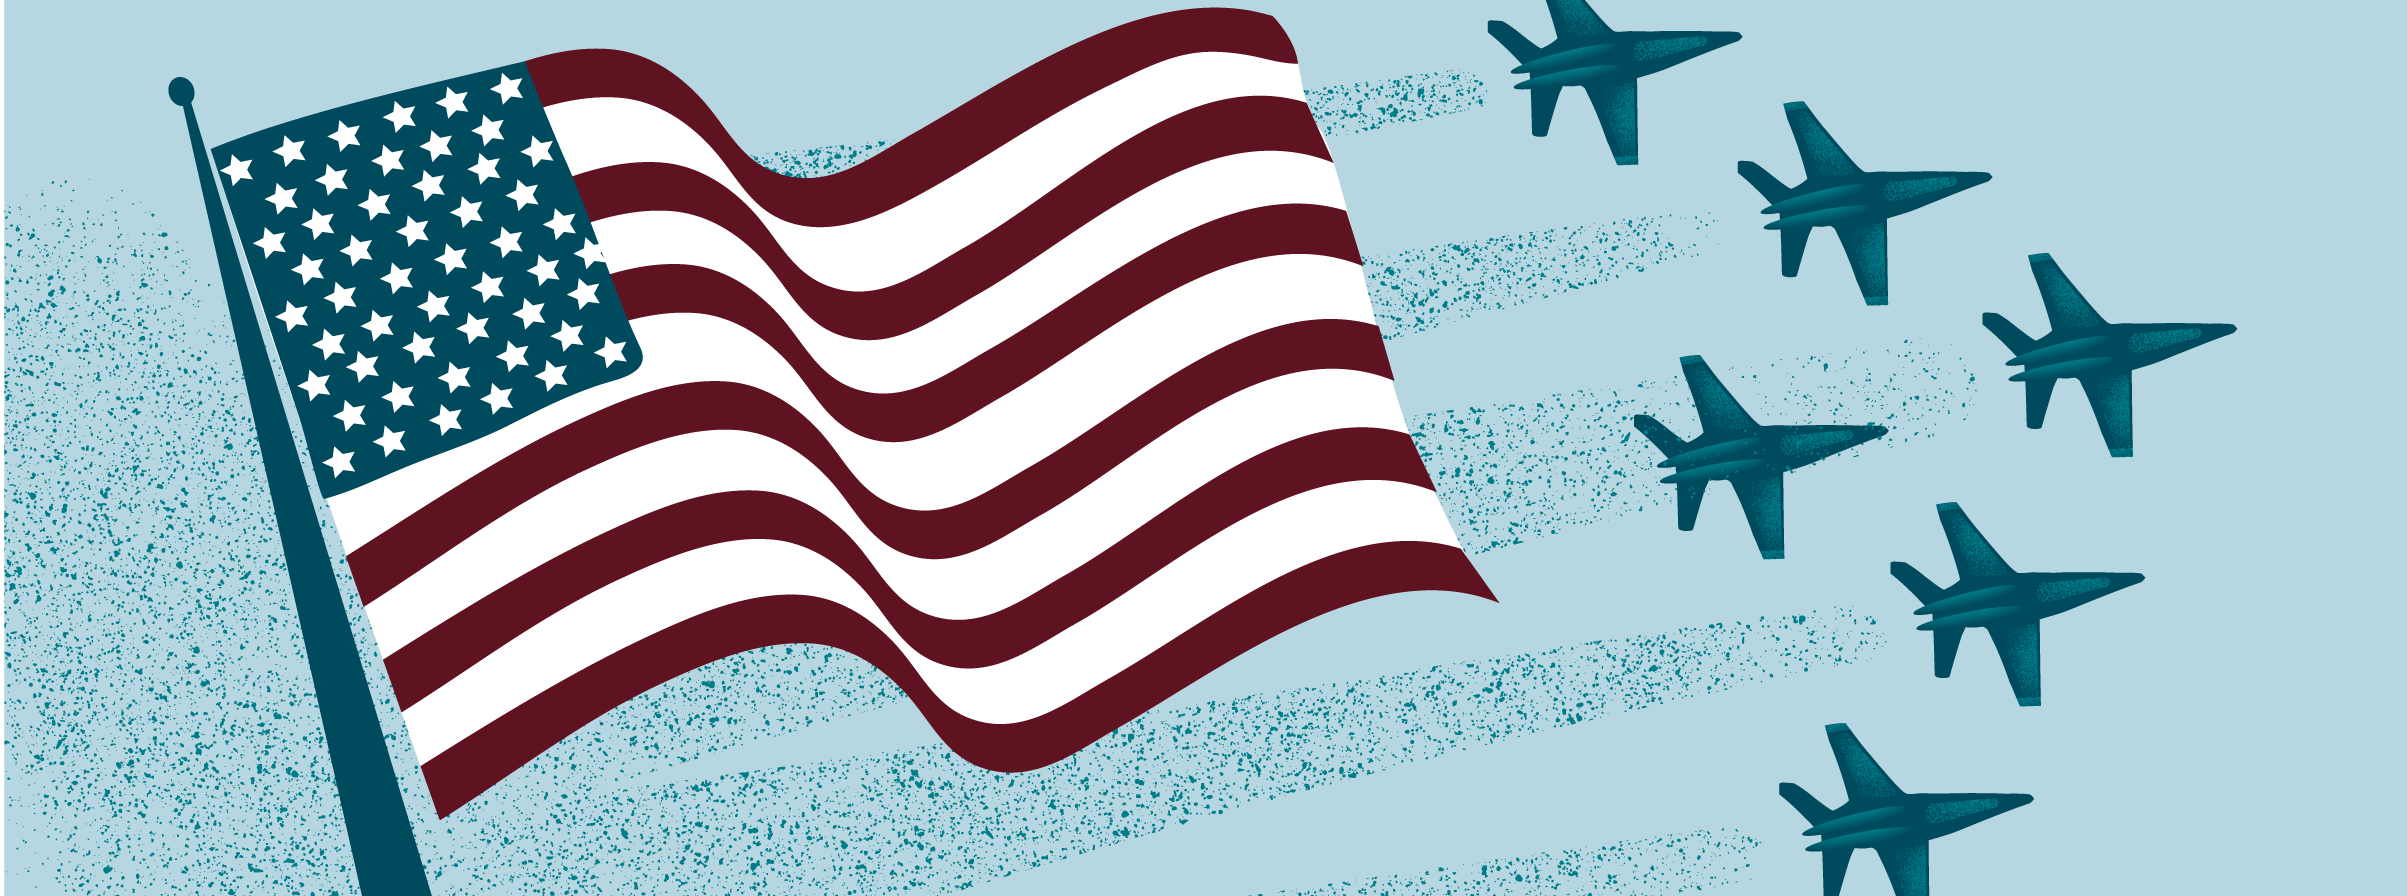 Illustration of an American flag and jets flying.